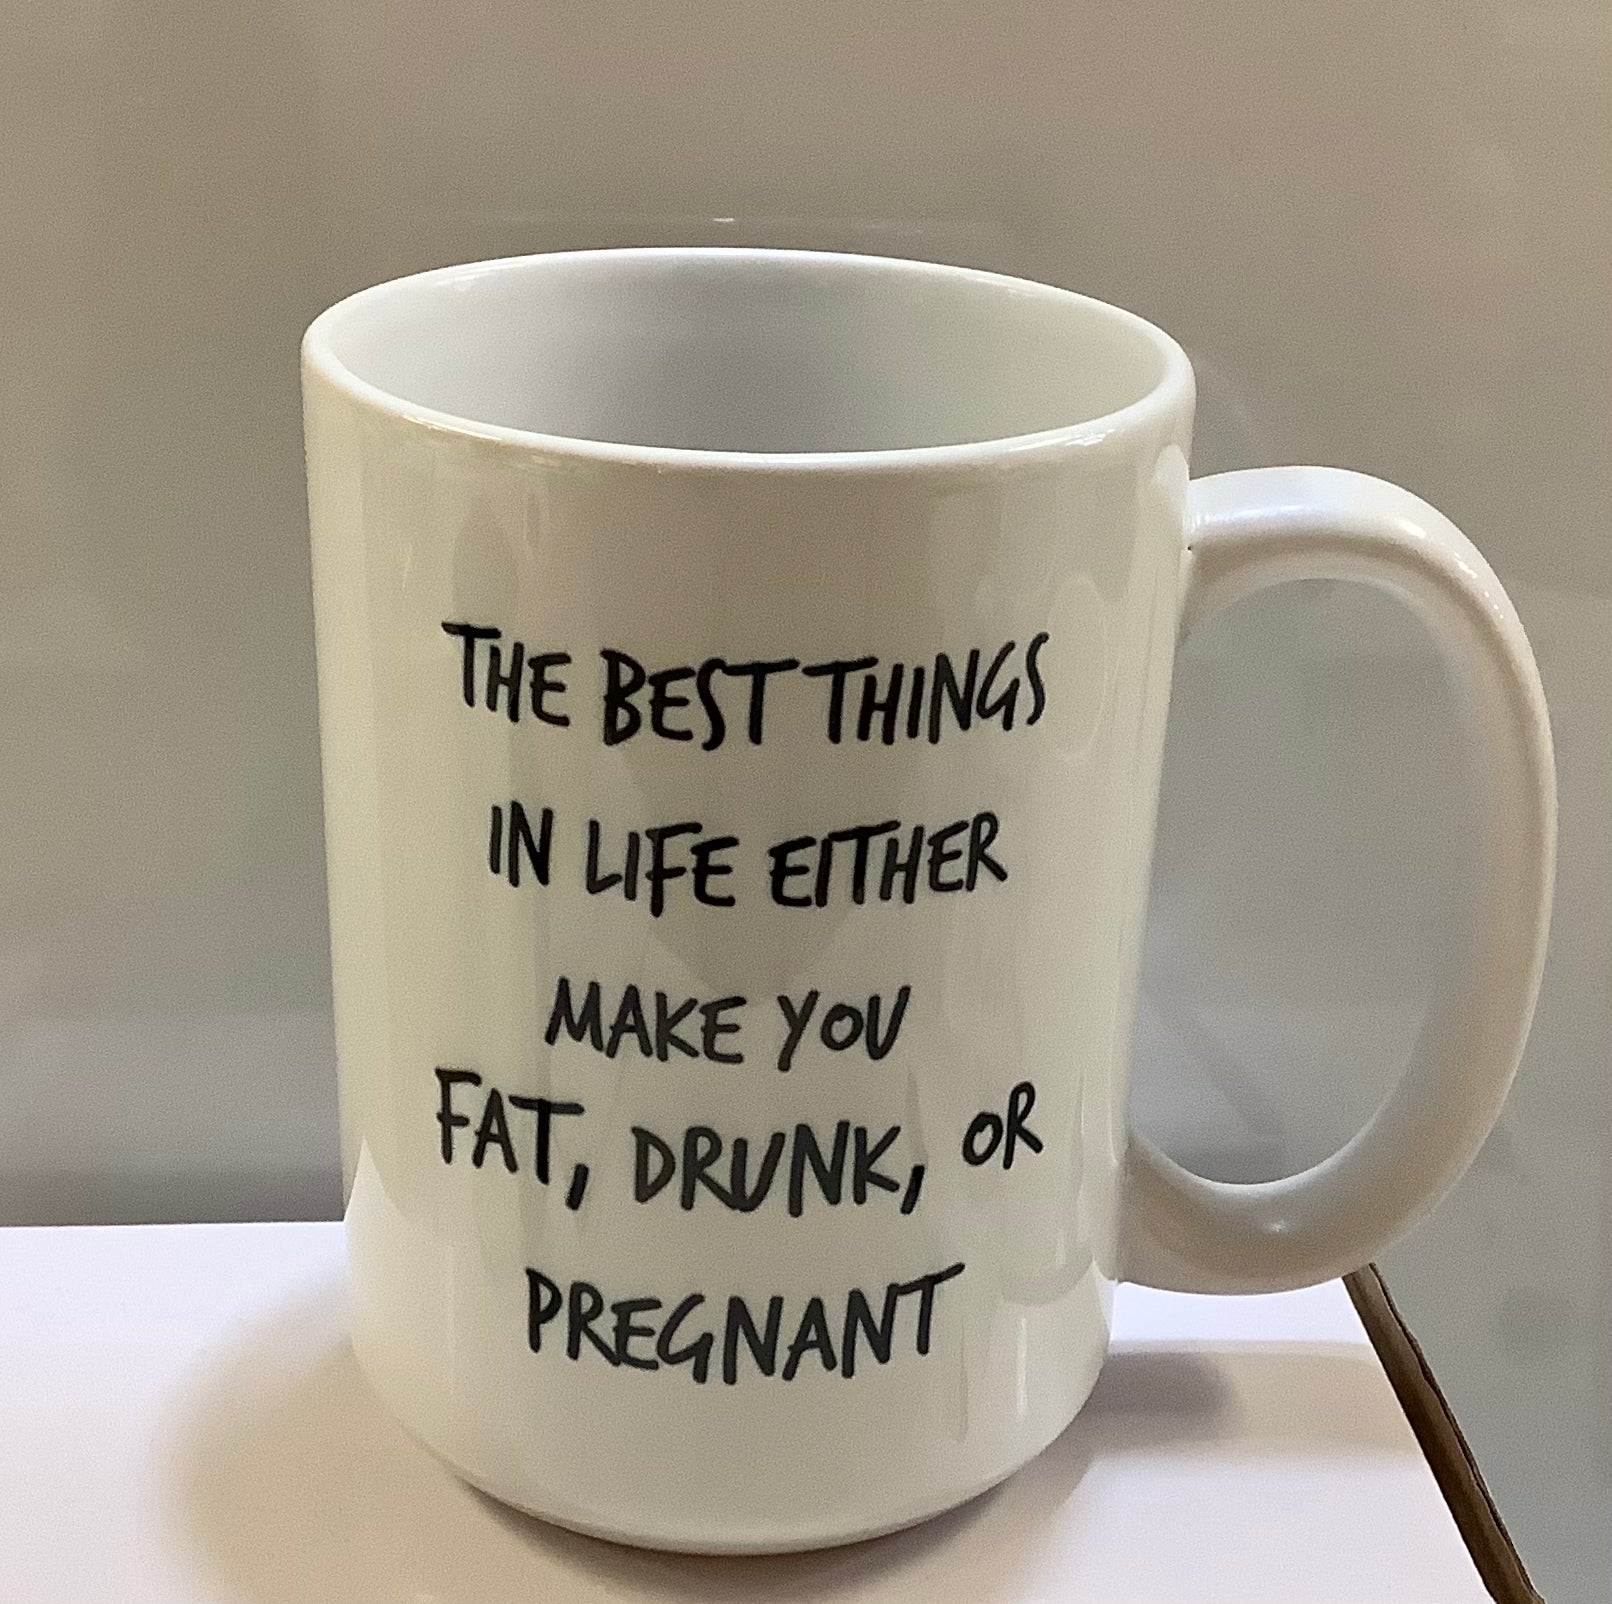 Coffee Mug Best Things Make You Fat, Drunk, or Pregnant